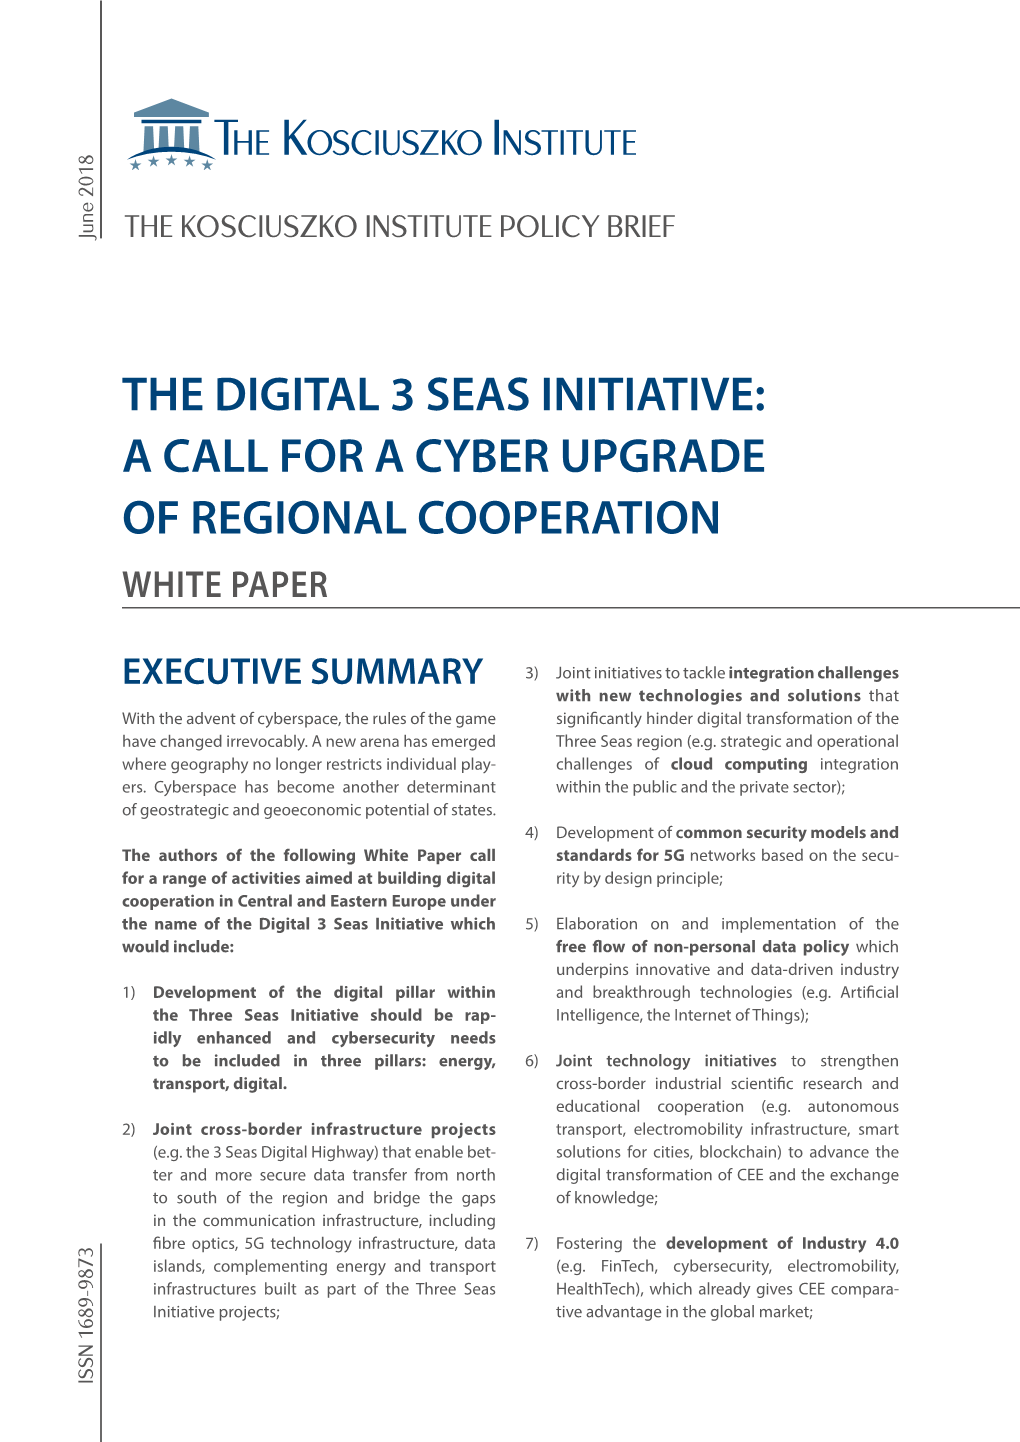 The Digital 3 Seas Initiative: a Call for a Cyber Upgrade of Regional Cooperation White Paper